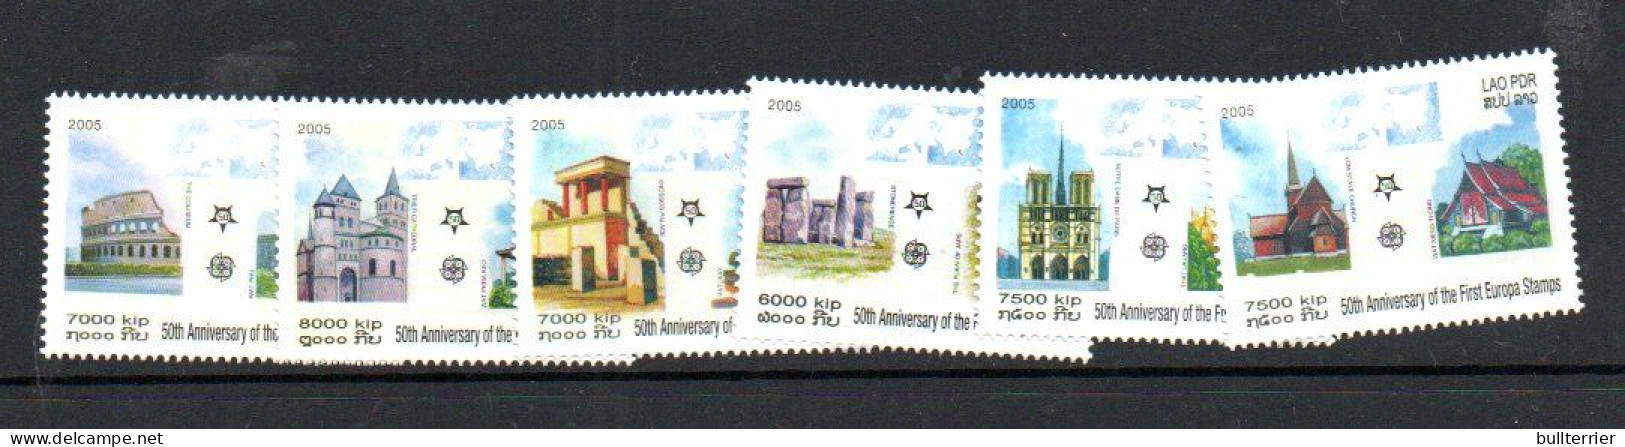 LAOS -  2005-  EUROPA STAMPS ANNIERSARY SET OF 6  MINT NEVER HINGED,SG CAT £18.50 - Laos